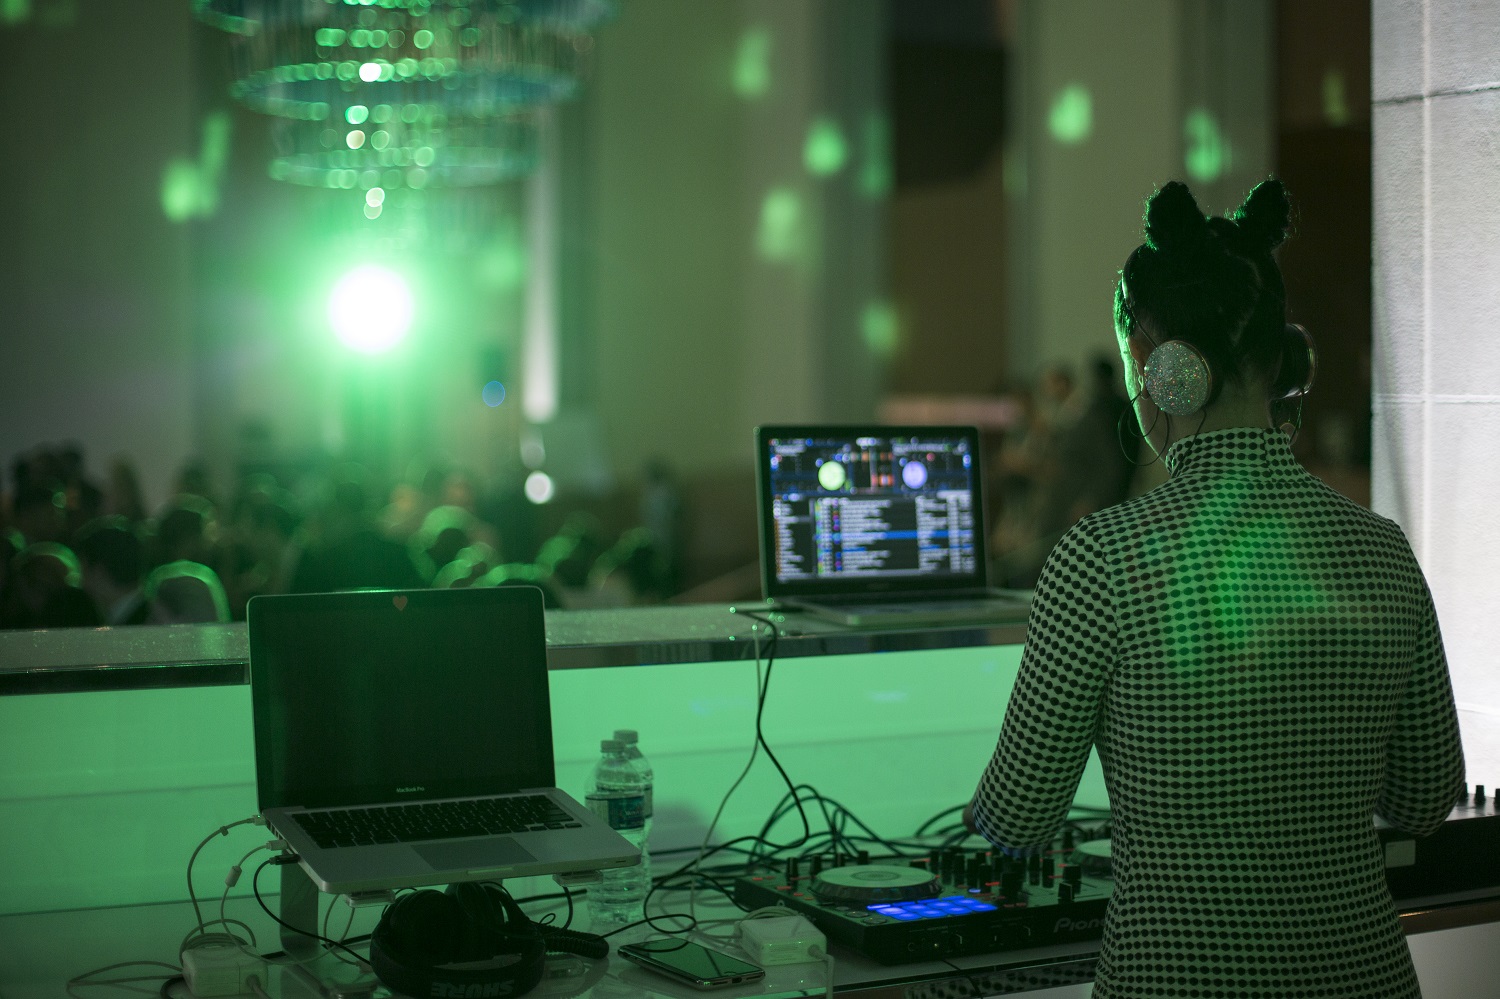 A DJ with her hair in two pigtail buns performs for a large crowd.